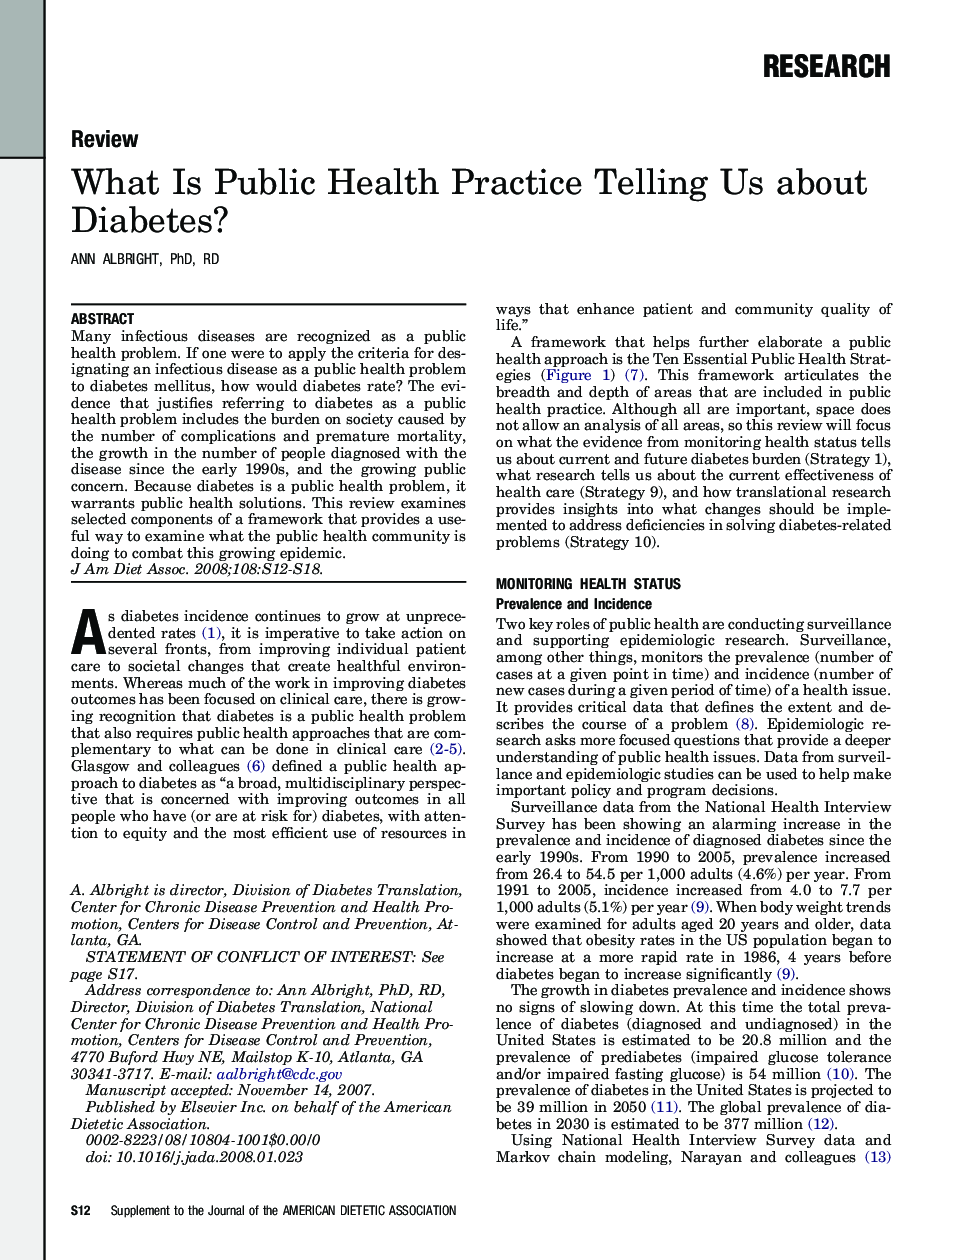 What Is Public Health Practice Telling Us about Diabetes? 